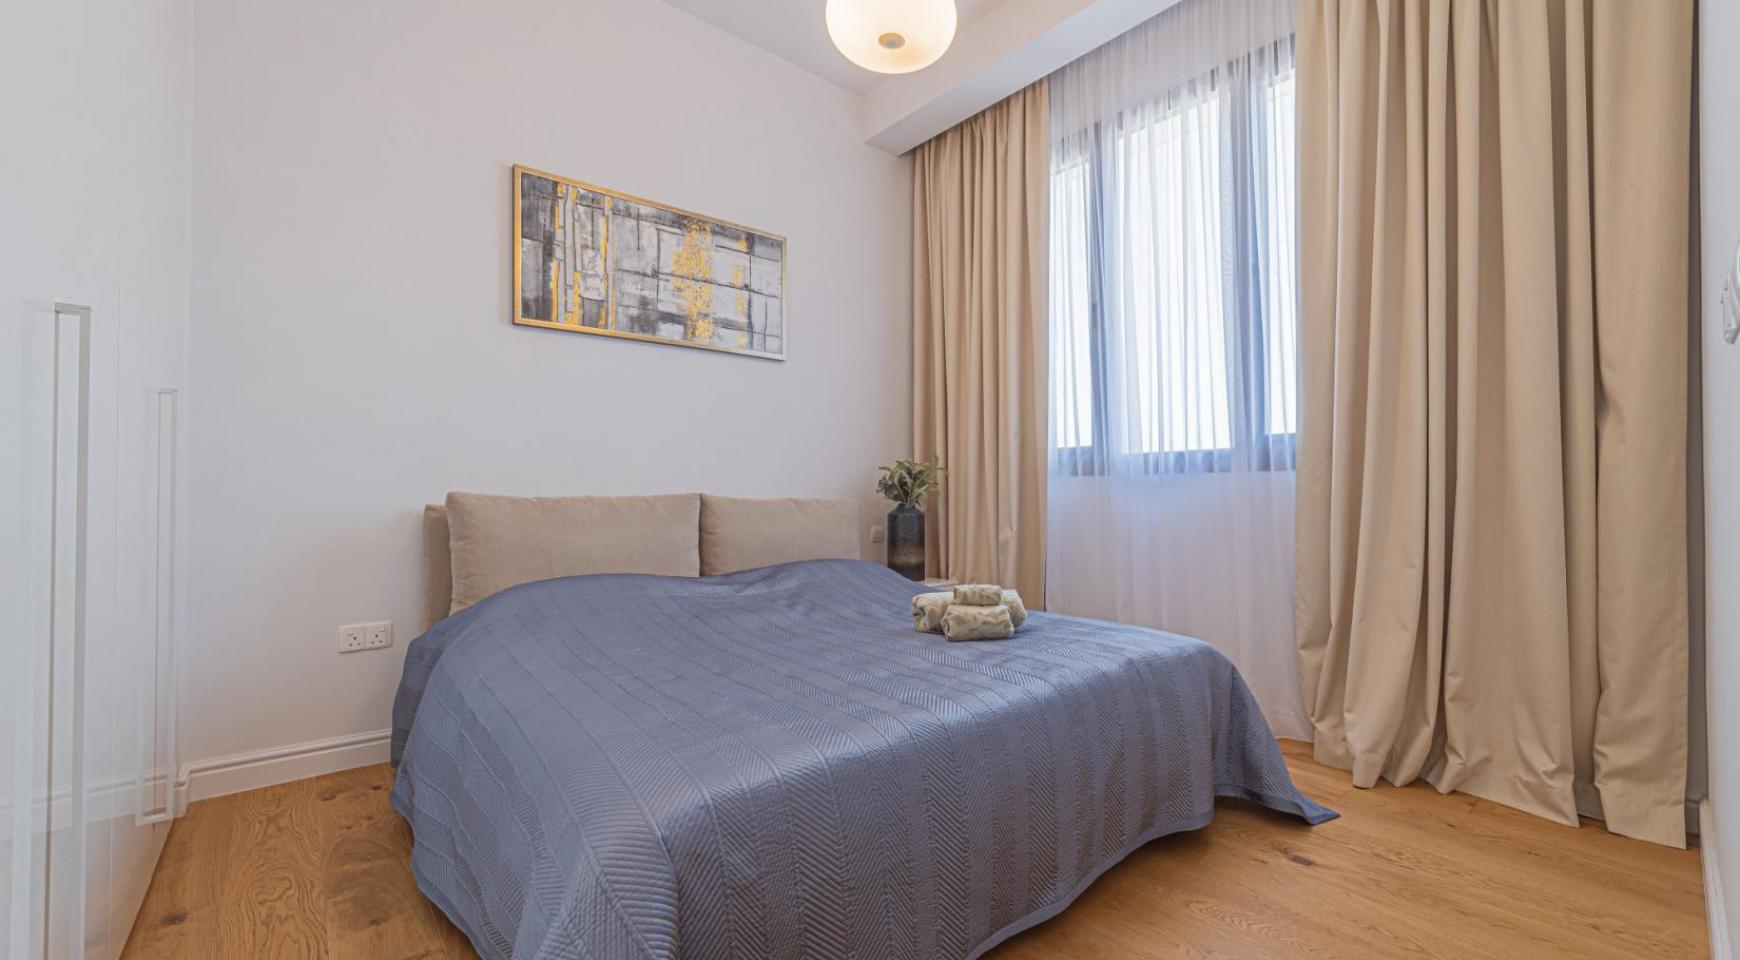 Hortensia Residence, Apt. 201. 2 Bedroom Apartment within a New Complex near the Sea  - 58